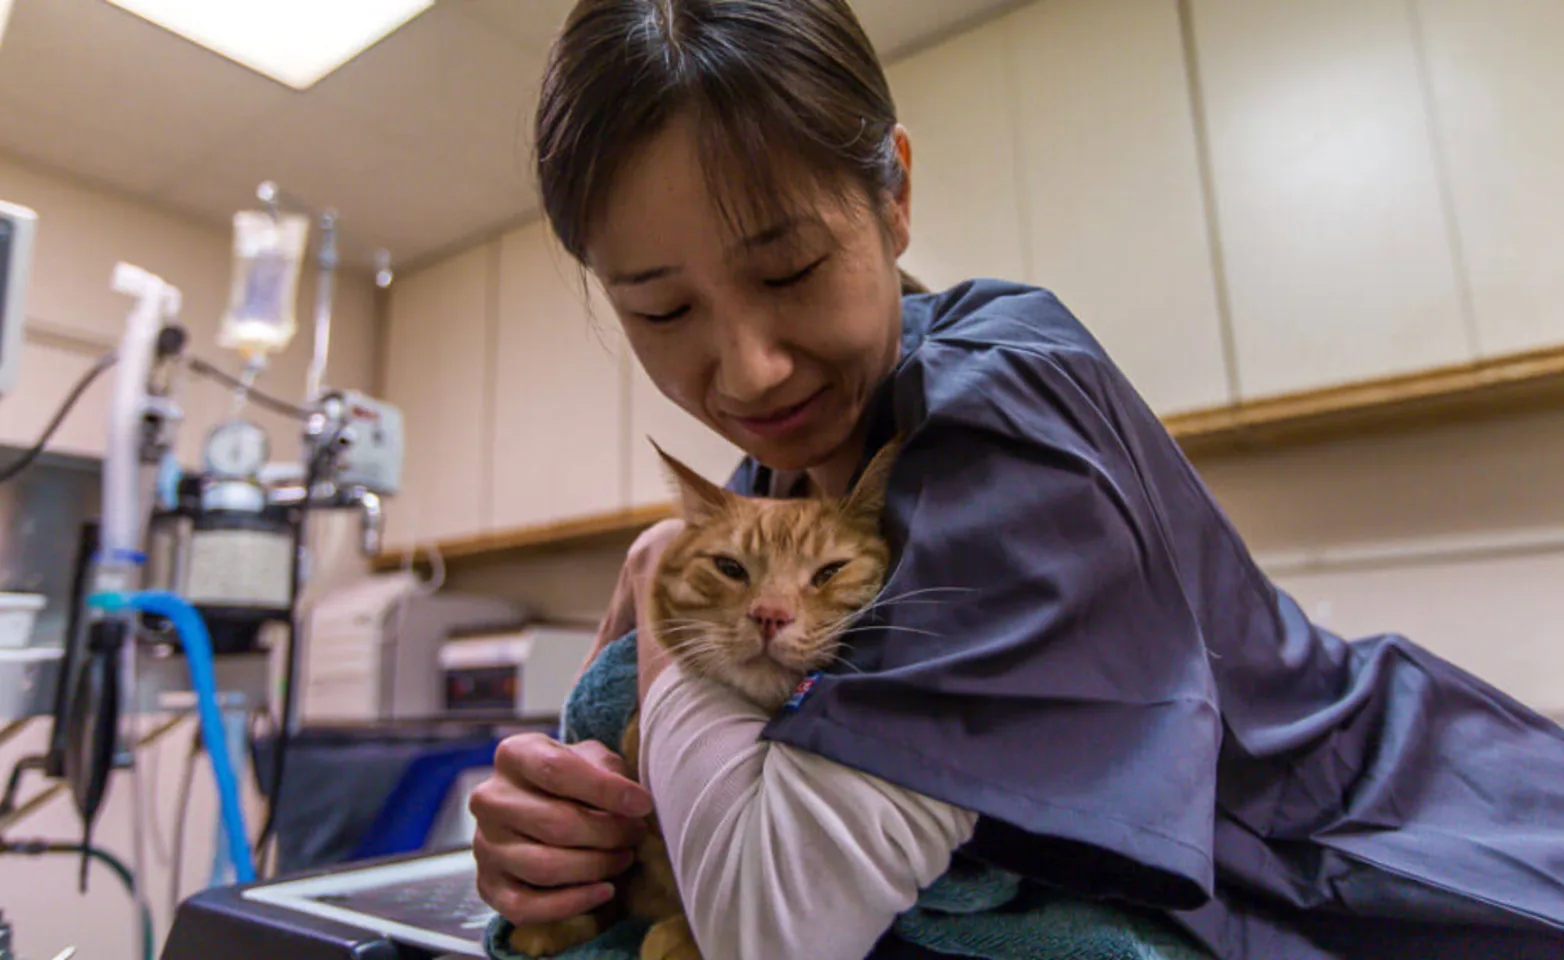 Staff member caring for a cat wrapped in a towel